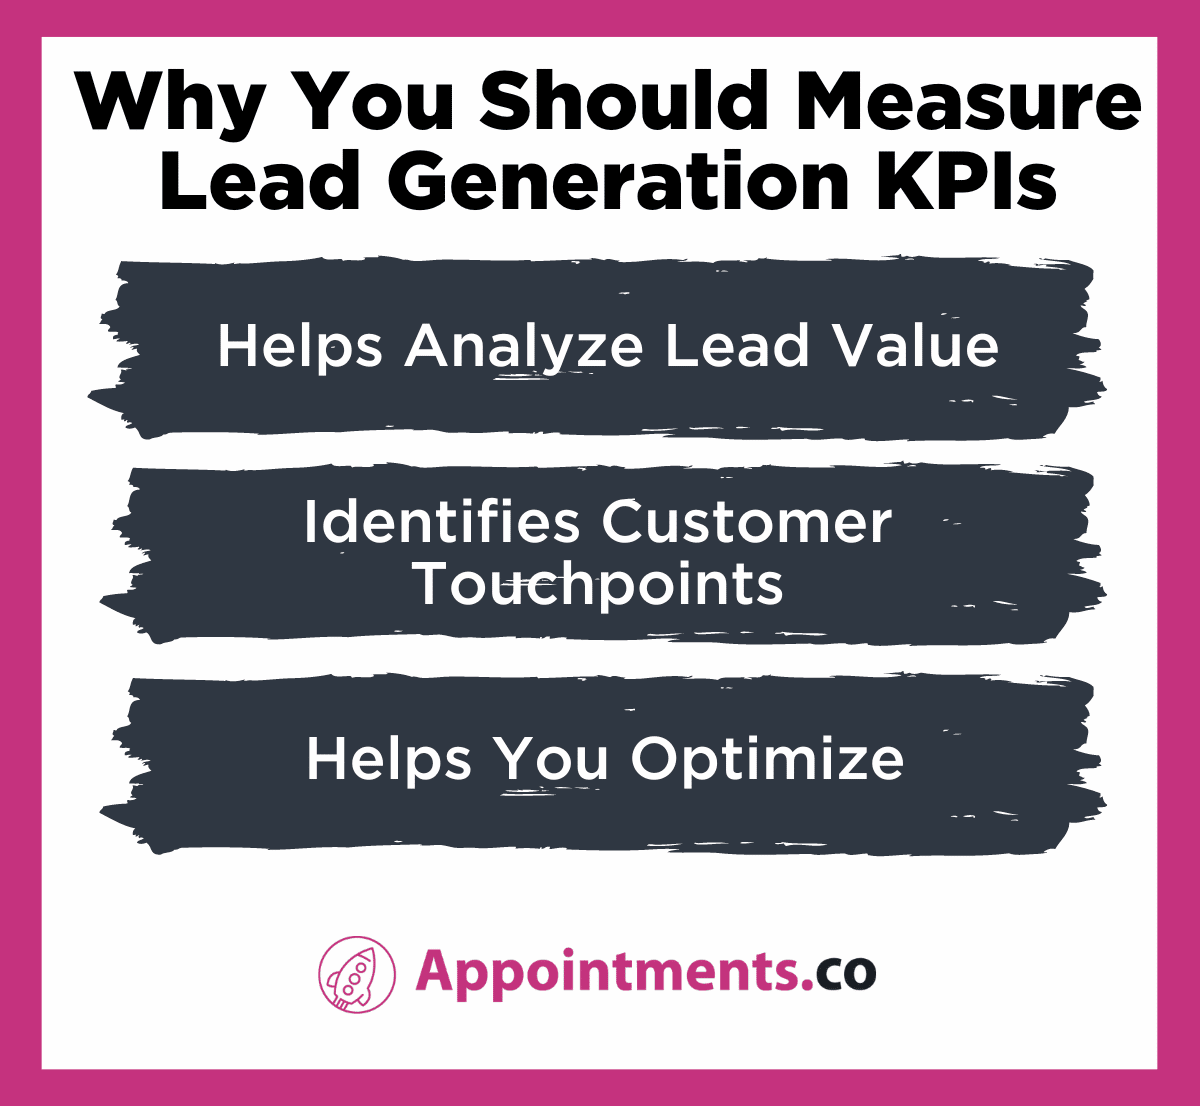 Why You Should Measure Lead Generation KPIs